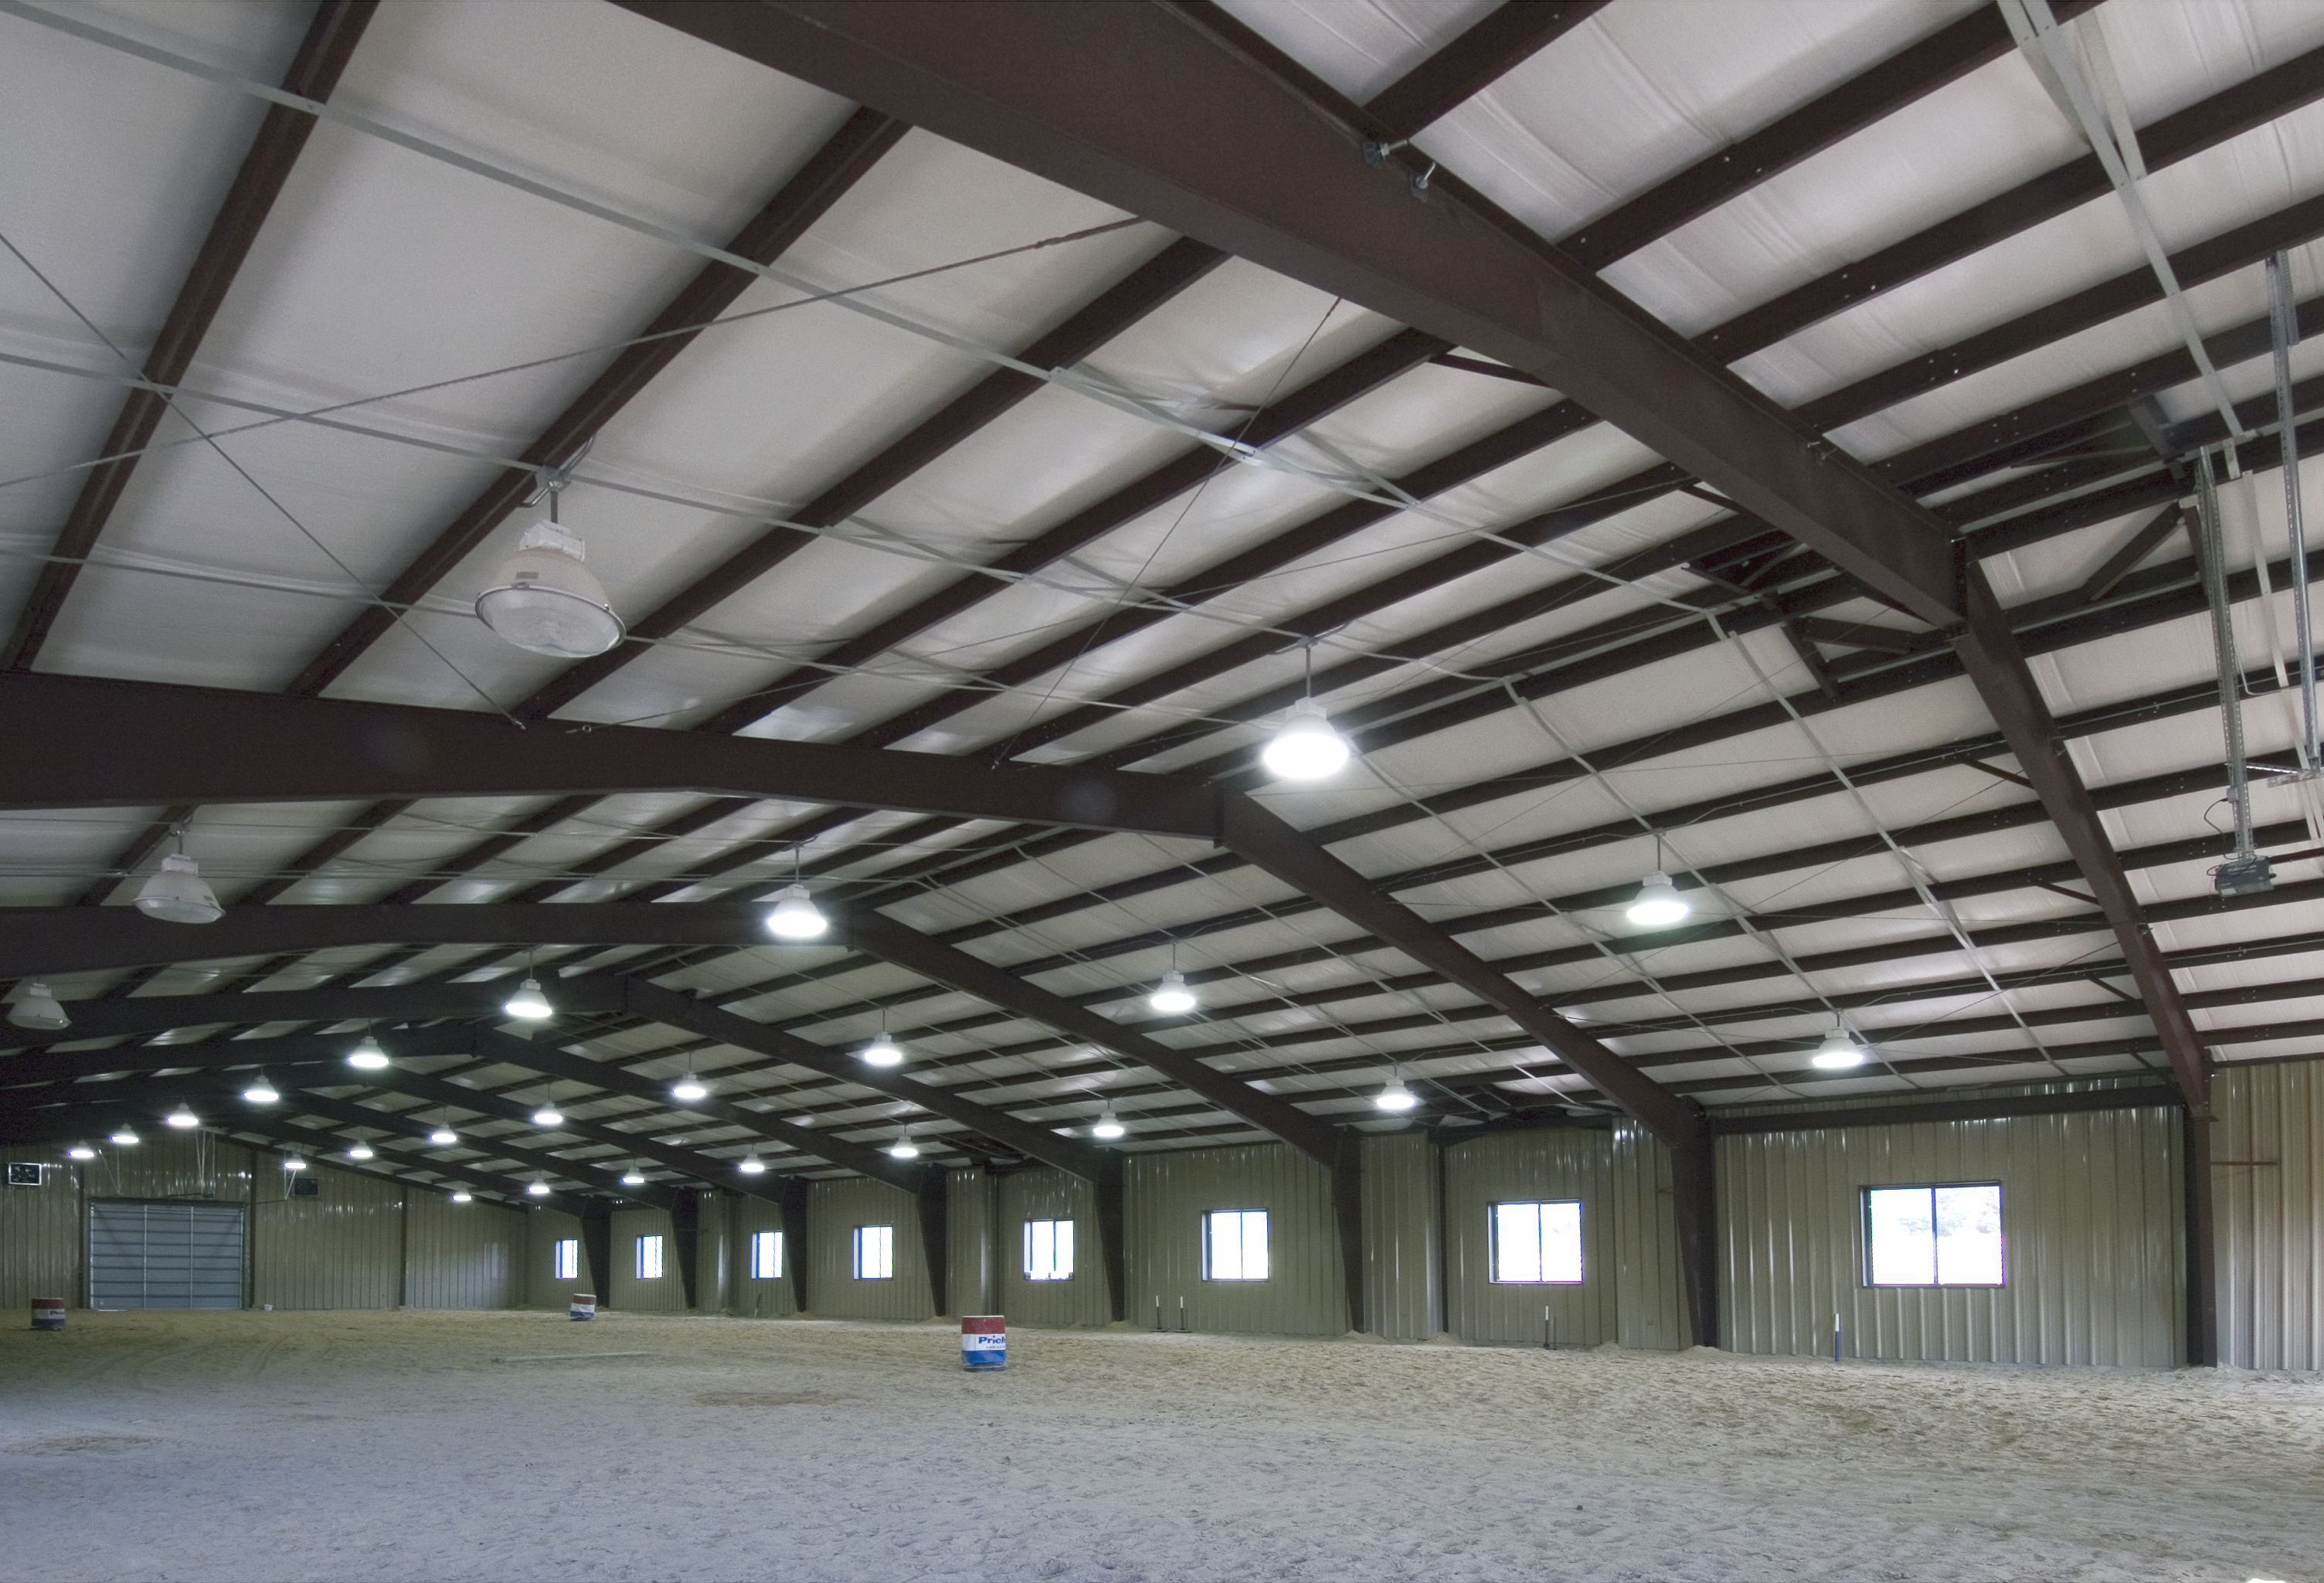 How to build a storage loft in a metal building ~ Famin